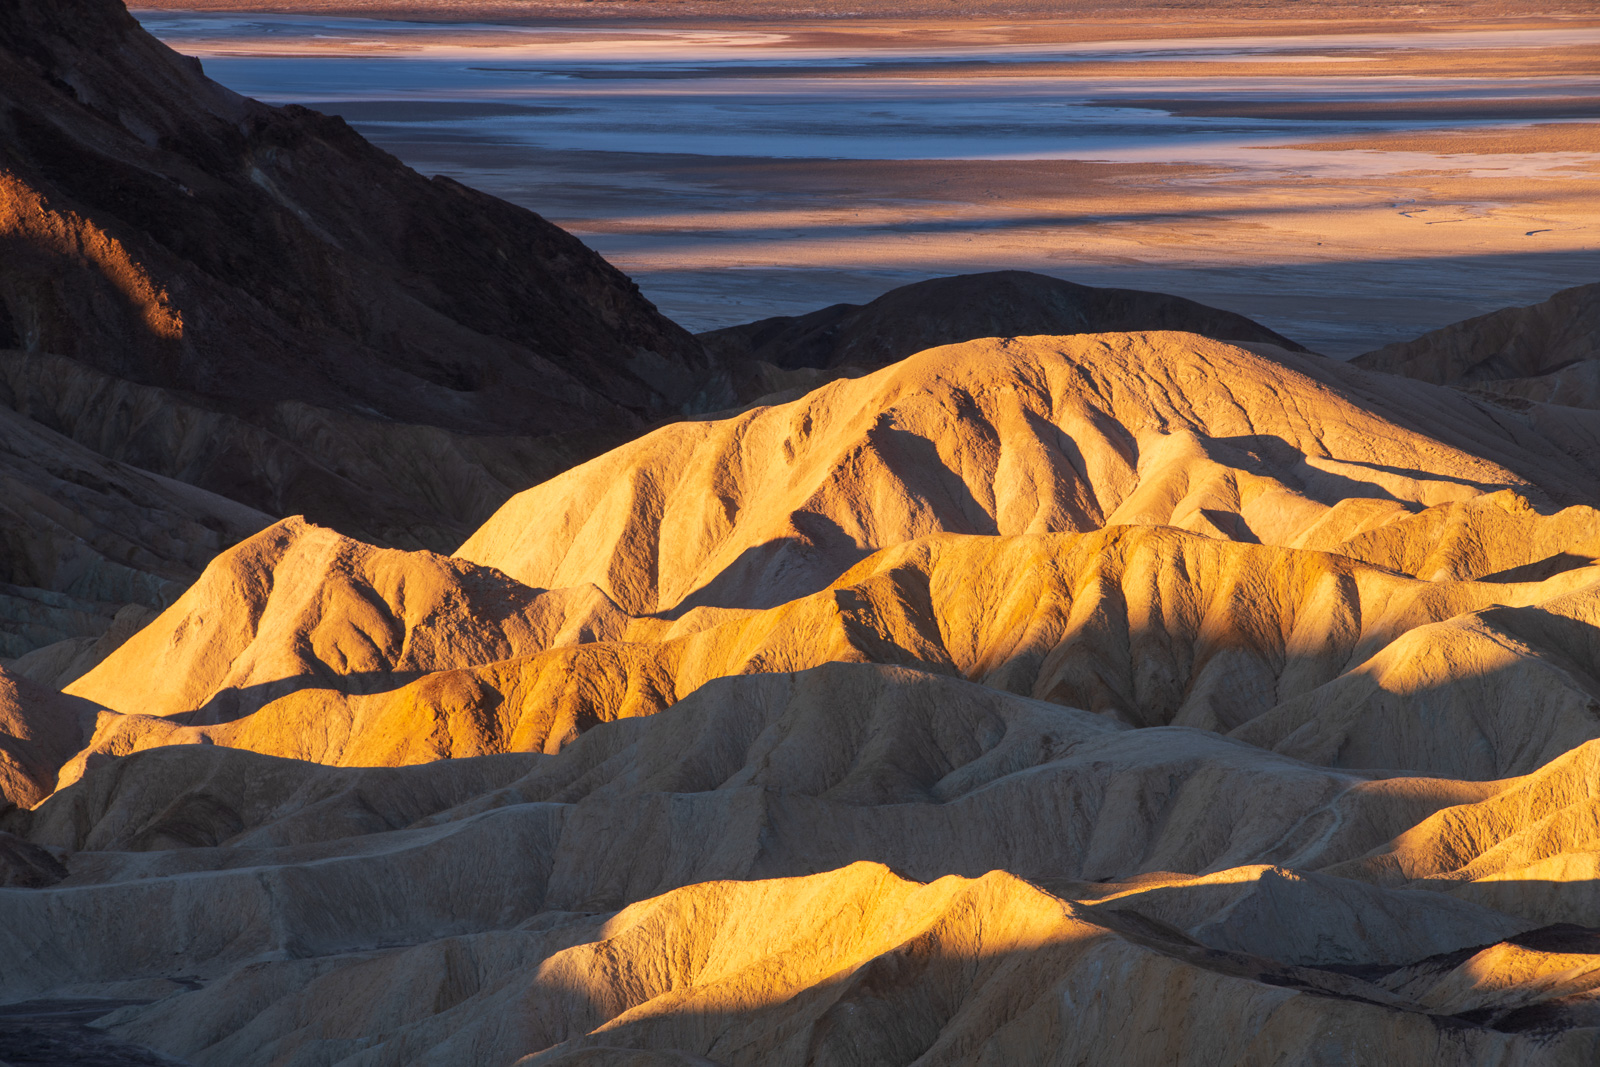 First light on the badlands from Zambriske Point, Death Valley National Park, California.